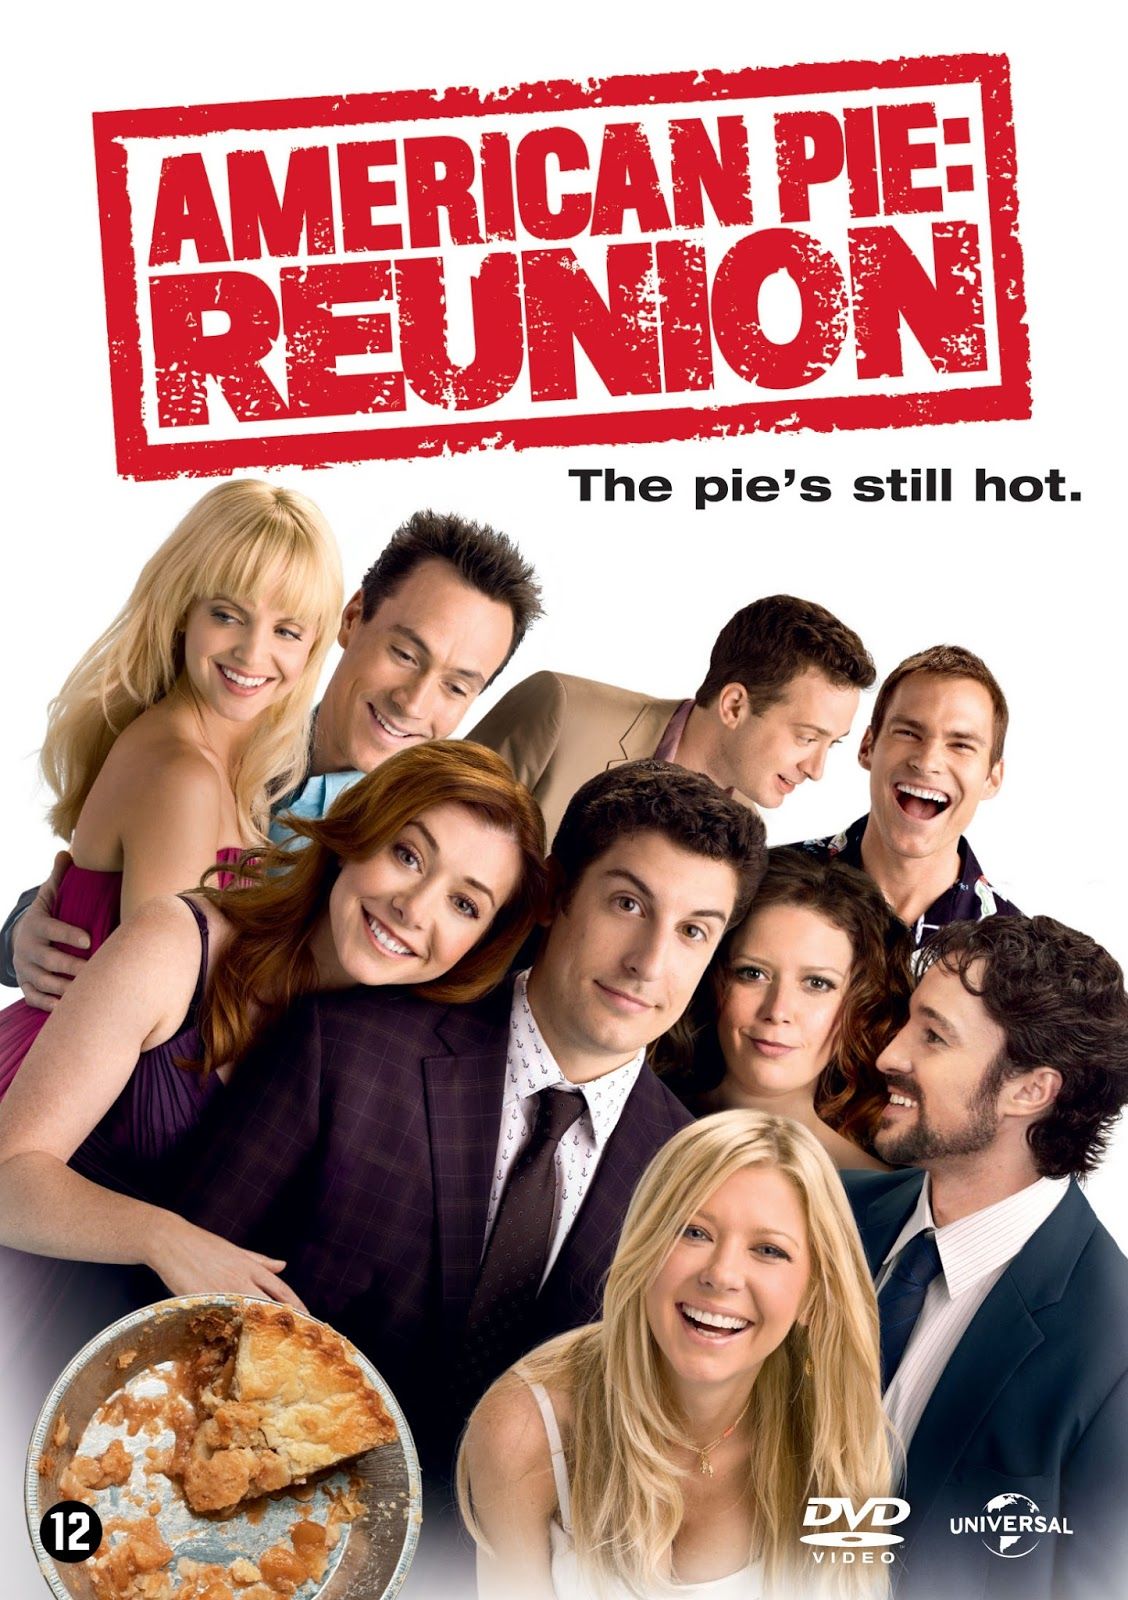 American pie reunion unrated